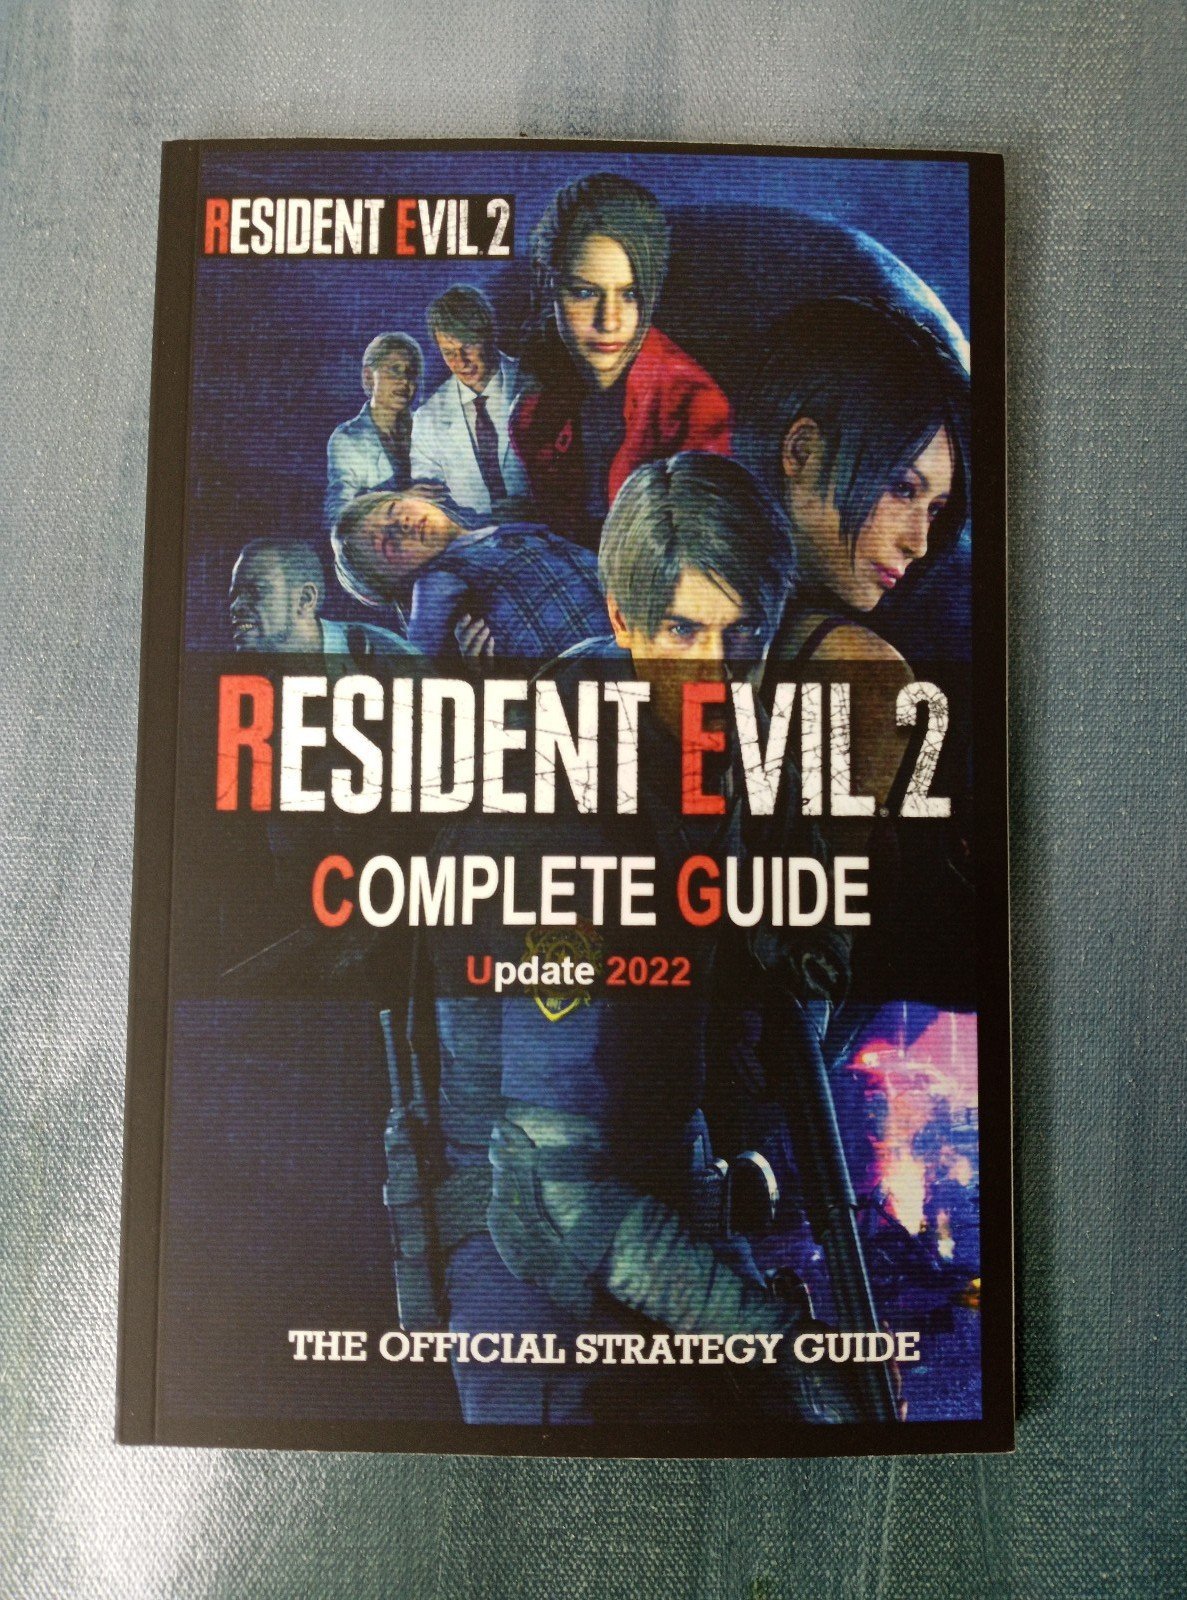 Resident Evil 2 Remake Complete Strategy Guide and Walkthrough Update 2022 New fNY9R50aN